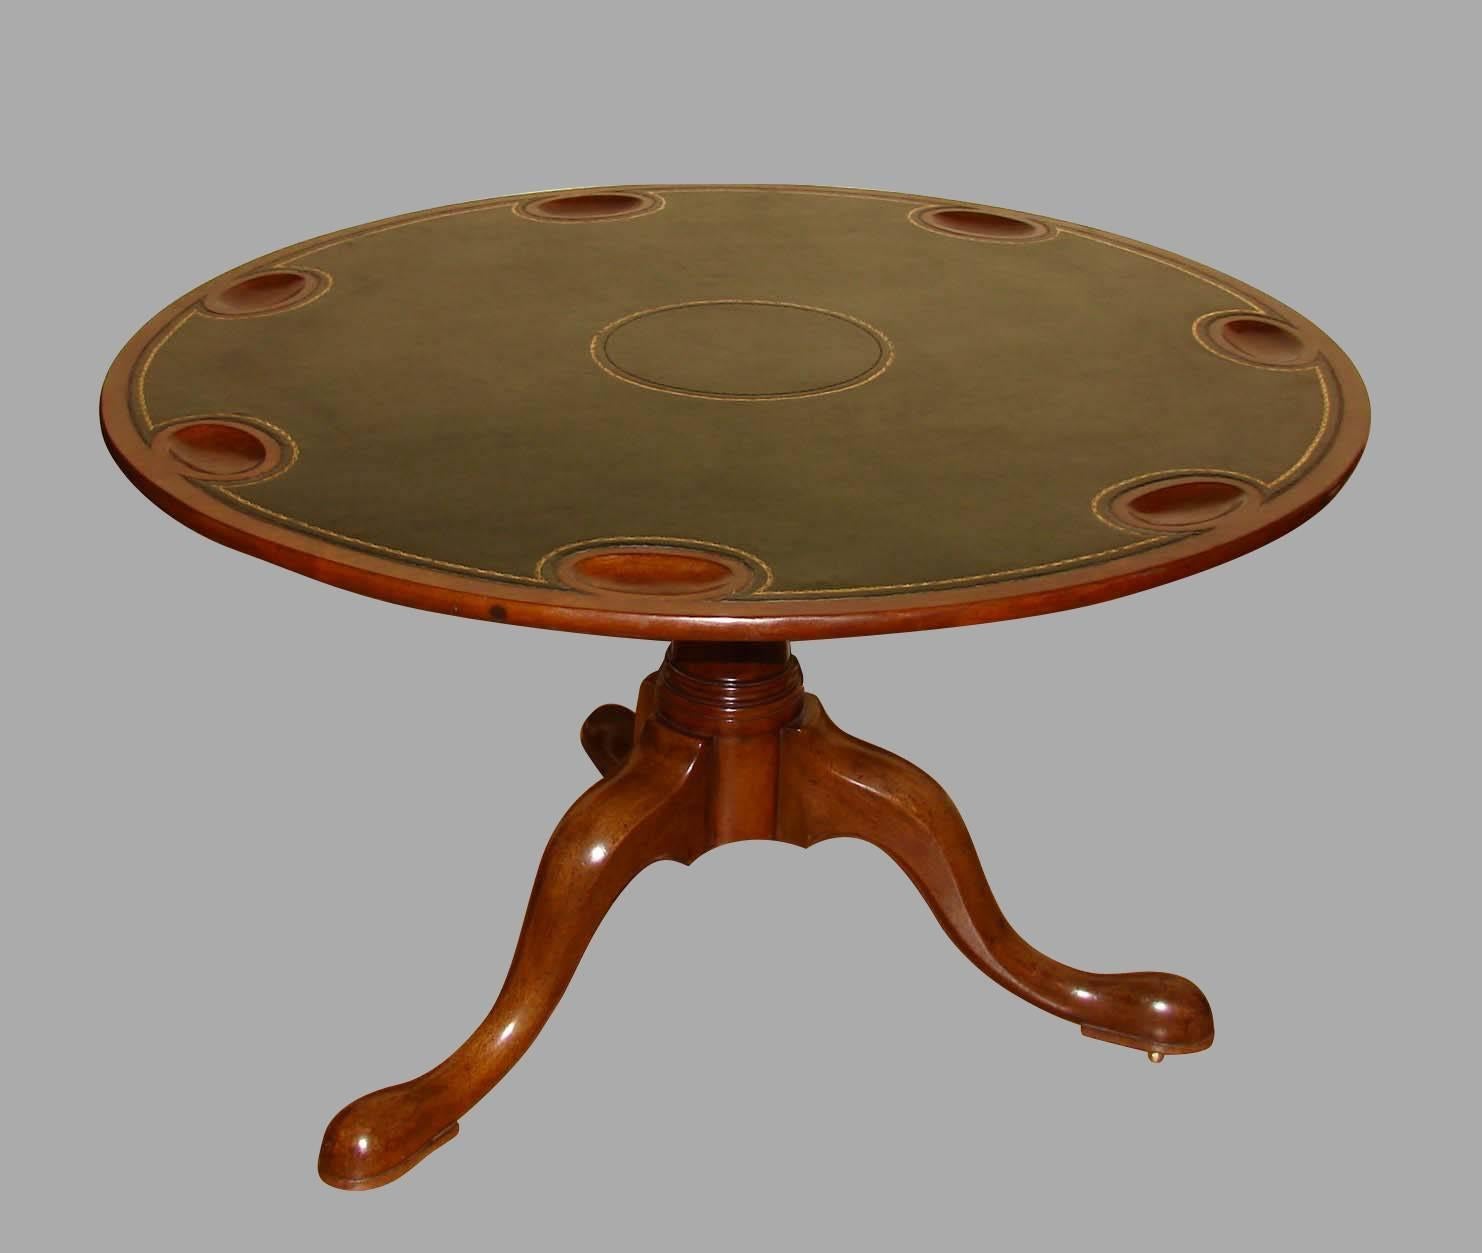 A round George III period mahogany tilt-top games table, the gilt-tooled green leather top with seven wells, supported on a turned central column with three cabriole legs terminating in pad feet on casters, circa 1770.